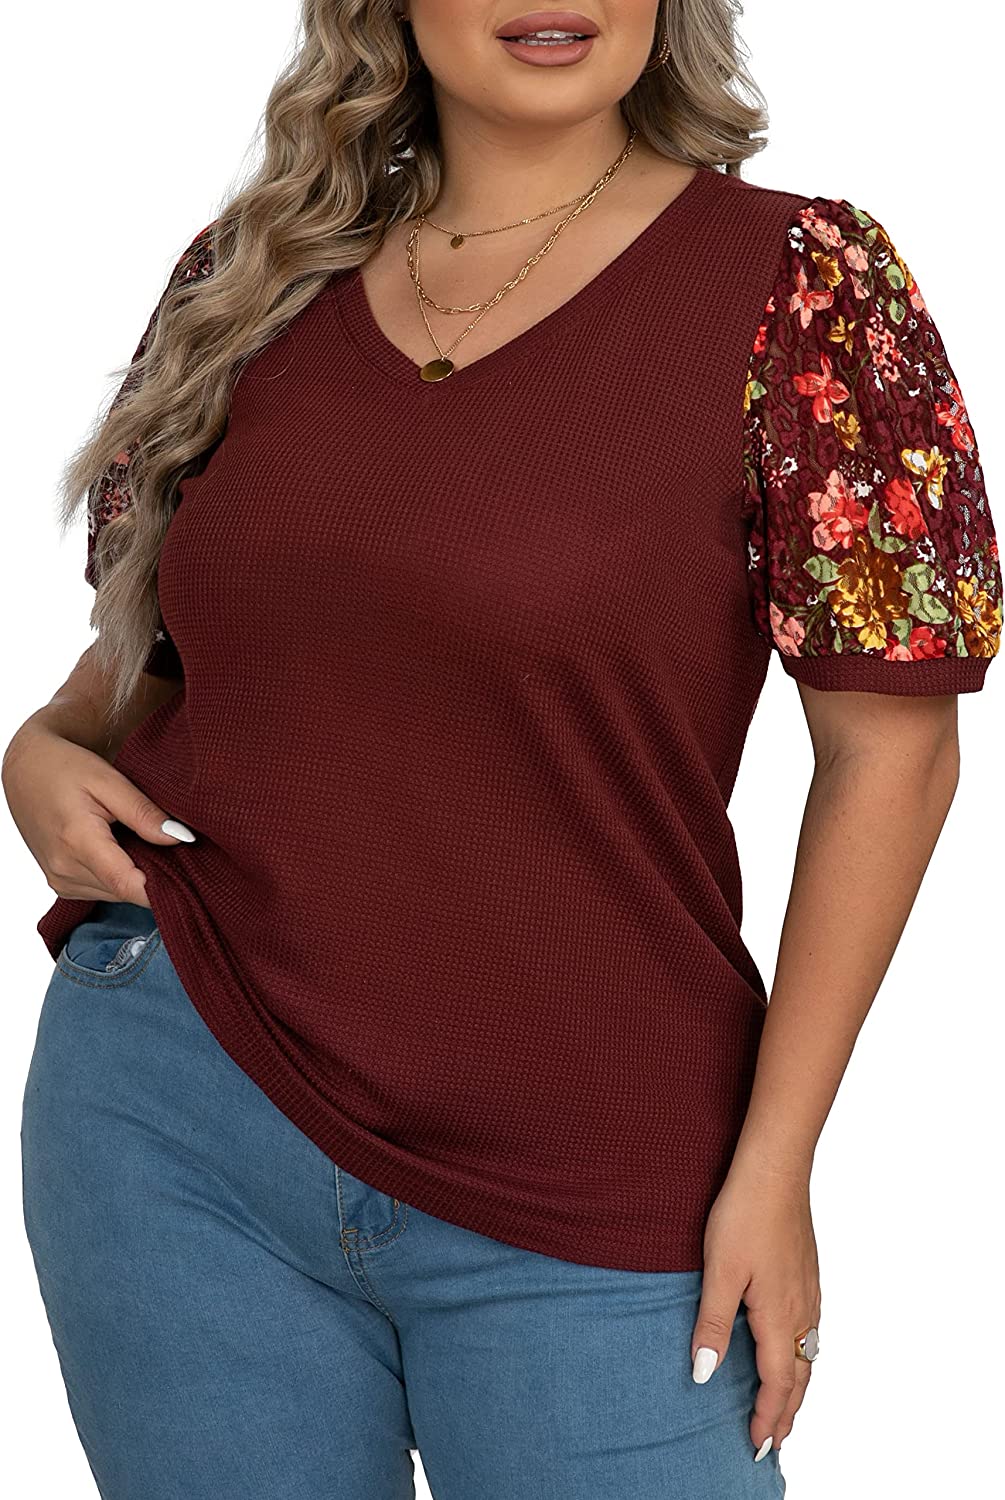 OLRIK Plus Size Tops for Women Lace Sleeve Blouse Waffle Knit